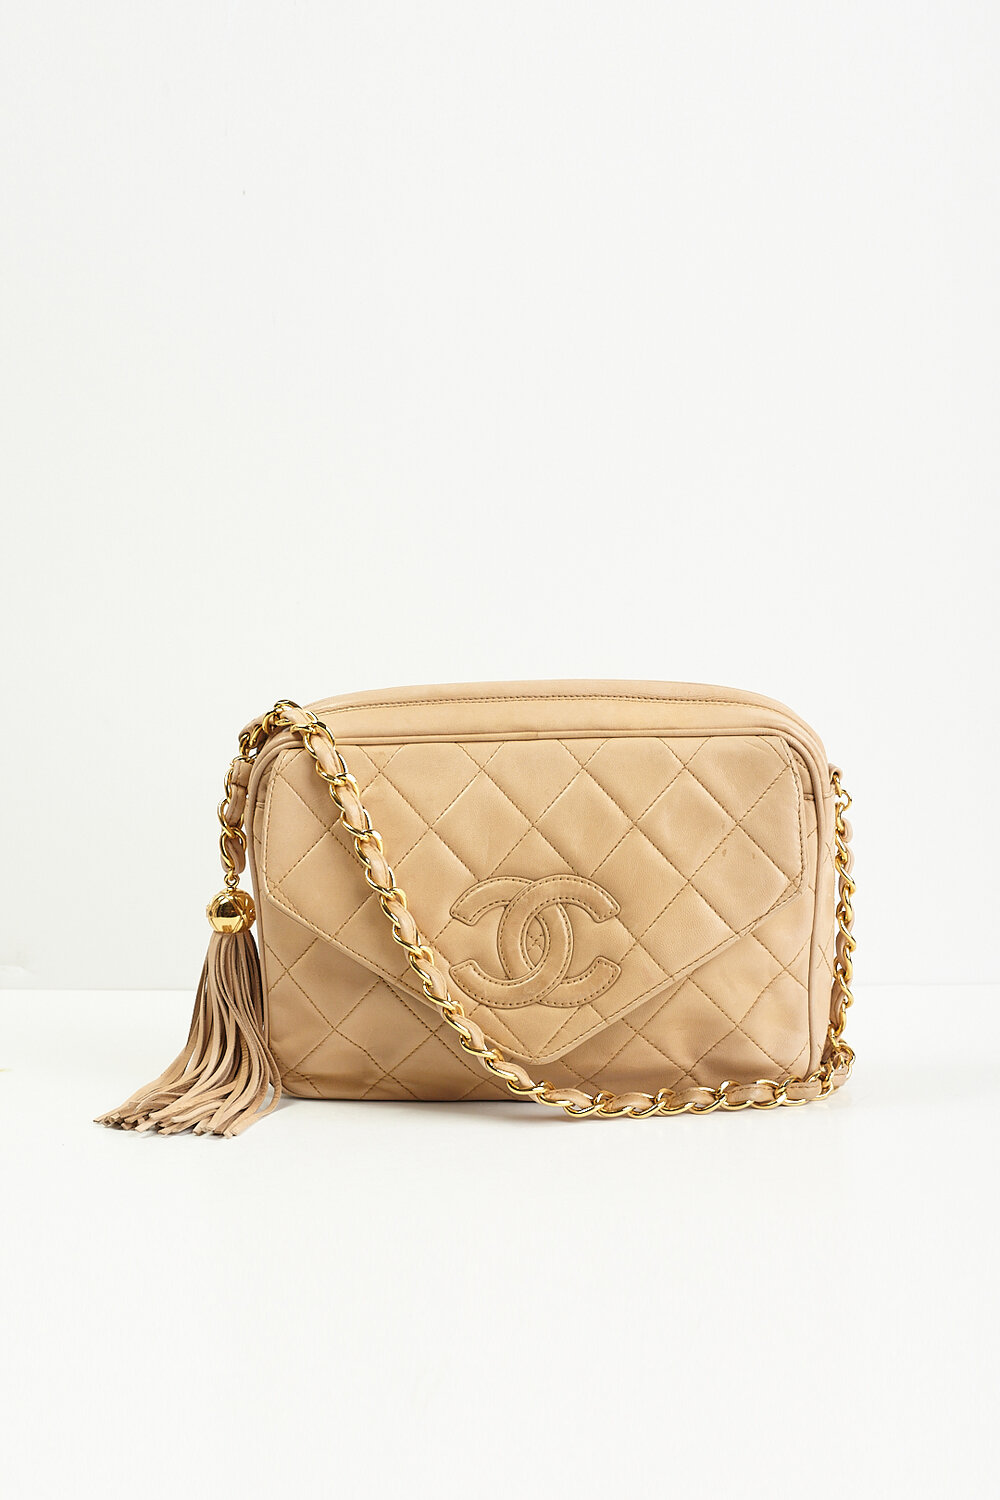 CHANEL 1996-1998 Beige Quilted Camera Bag — Garment